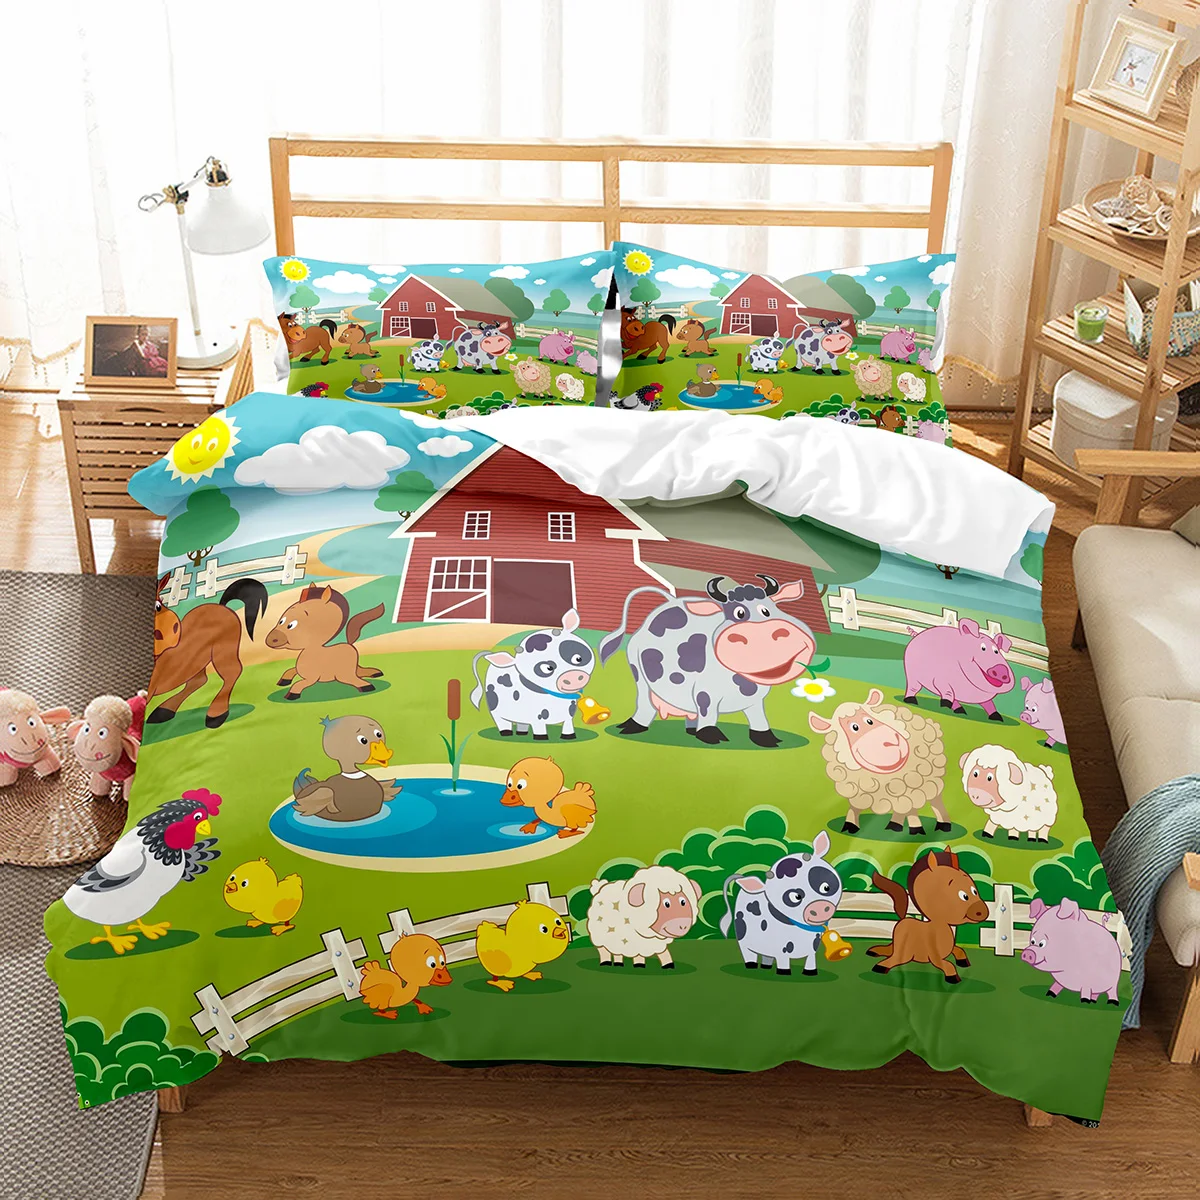 Farm Animals King Queen Duvet Cover Kids Cartoon Cow Bedding Set Deer Wooden House Chick Quilt Cover Polyester Comforter Cover